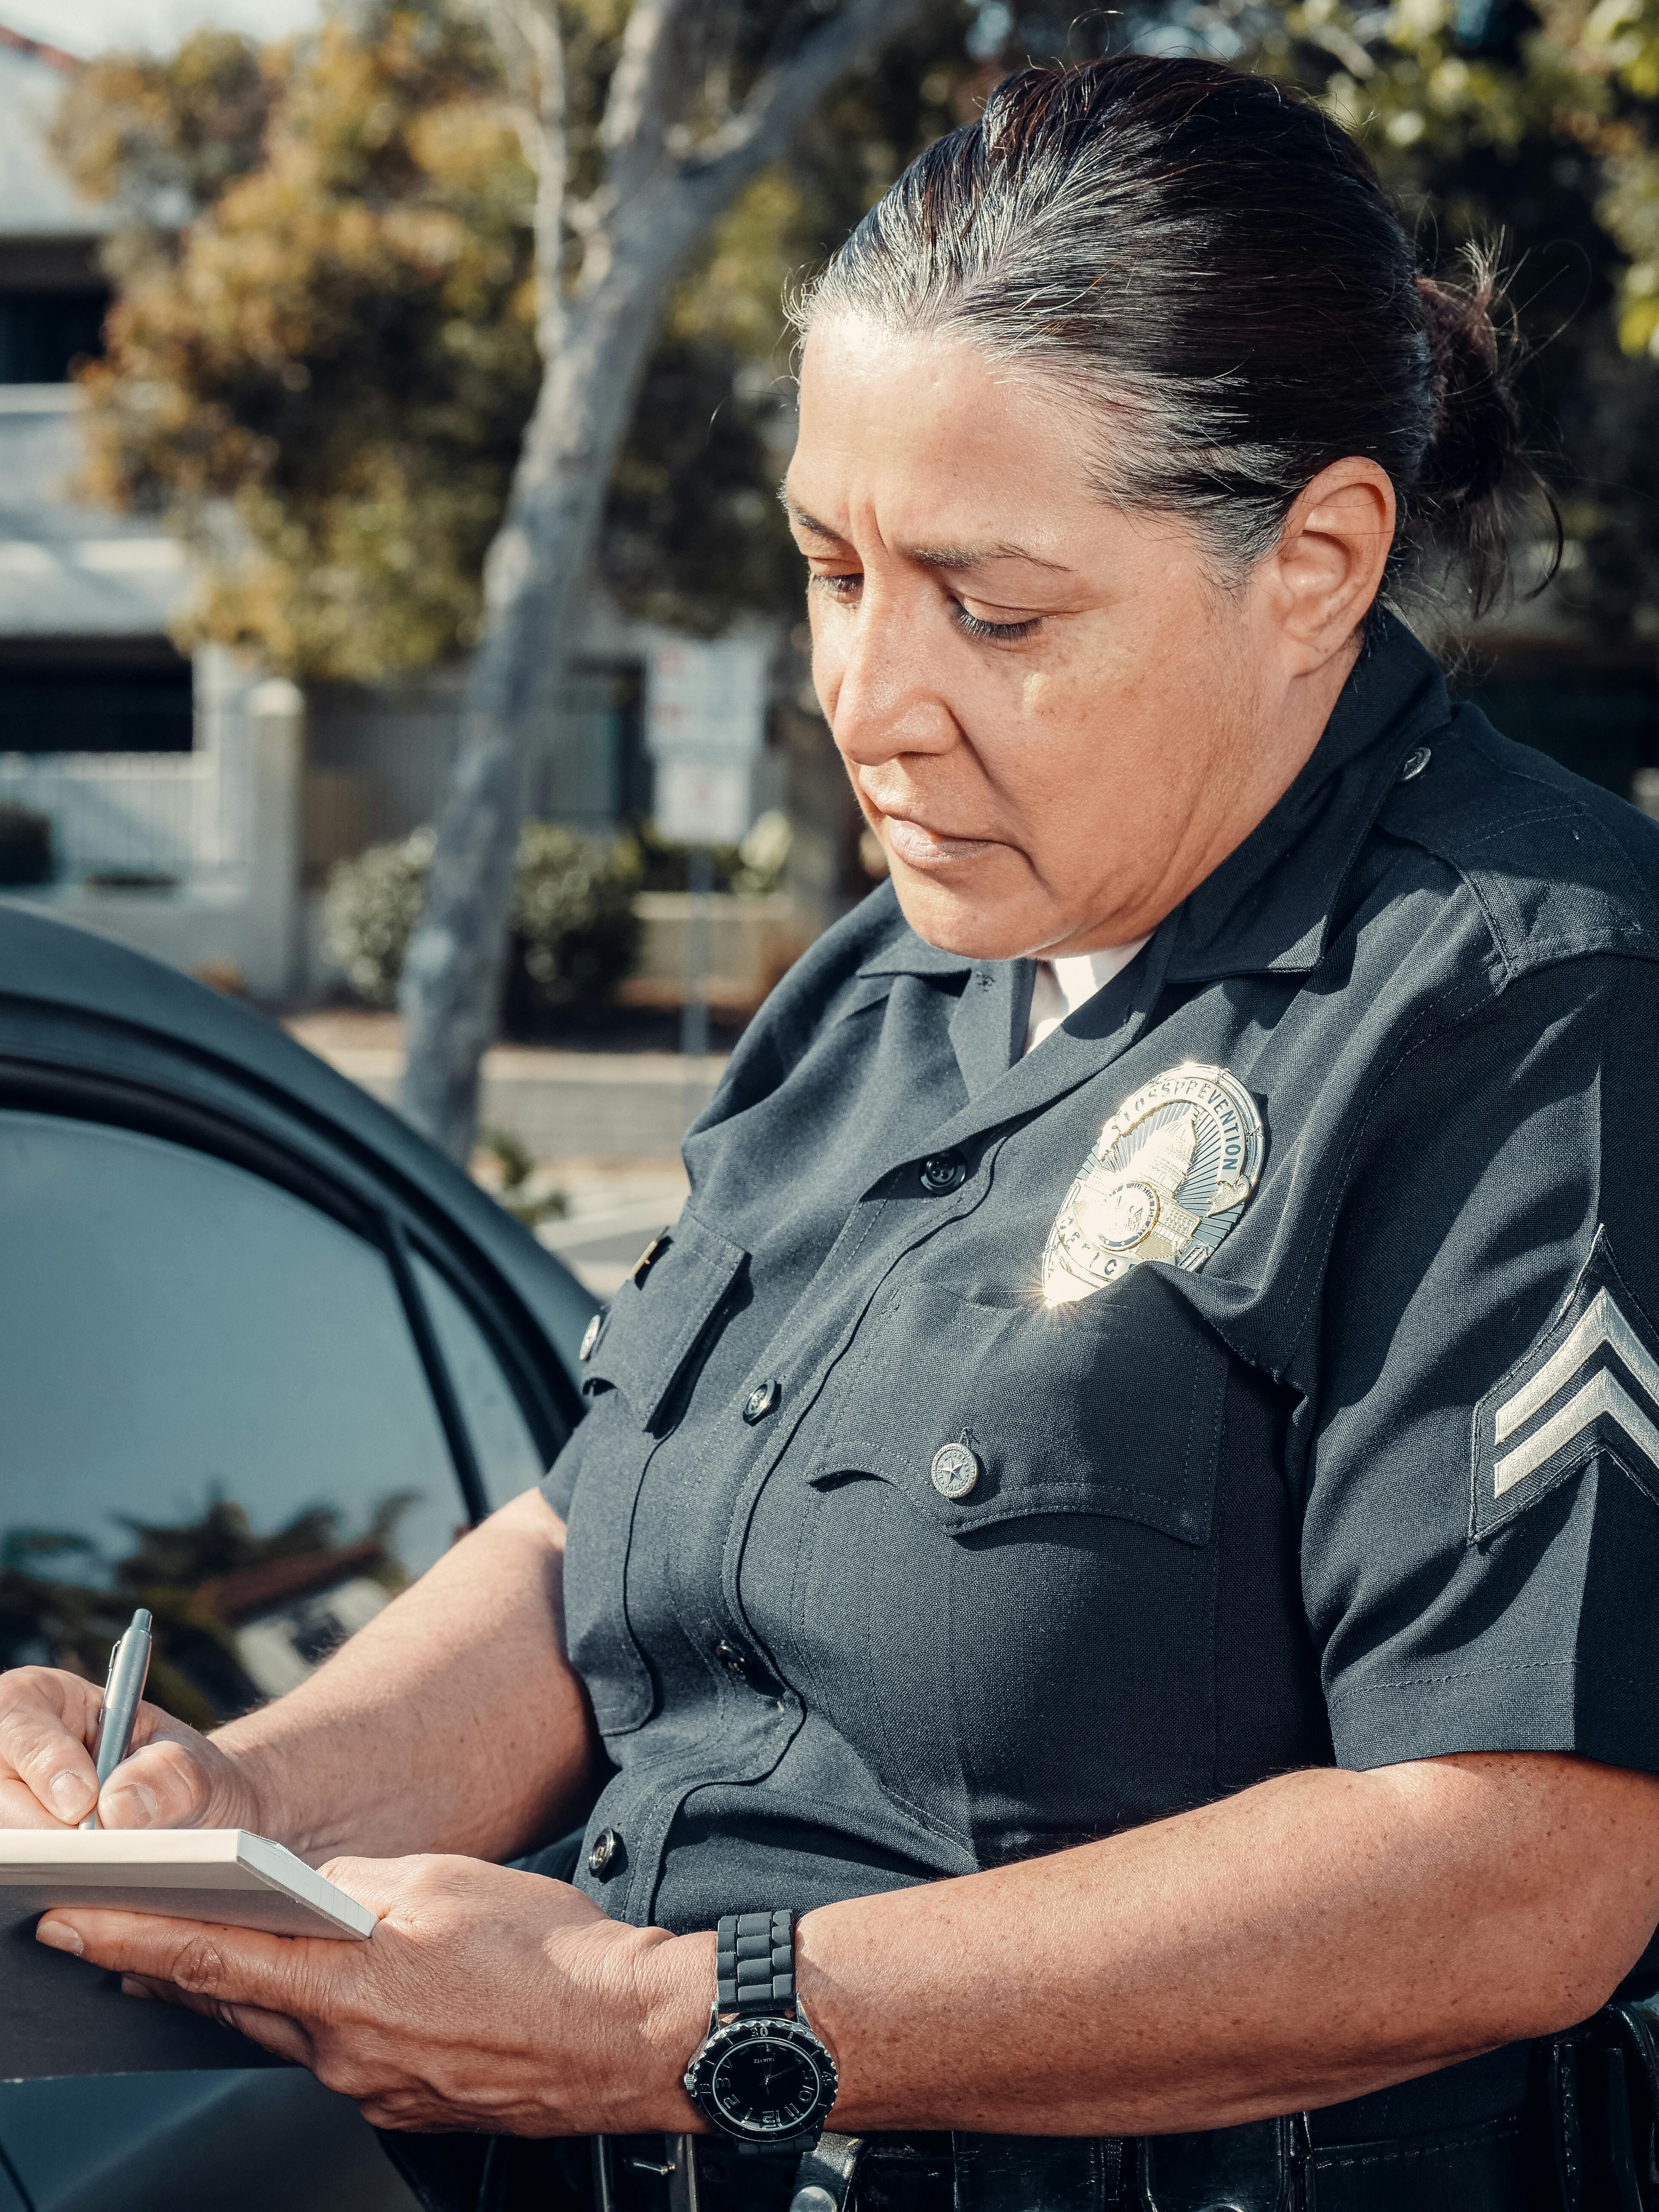 A police officer taking notes | Source: Pexels